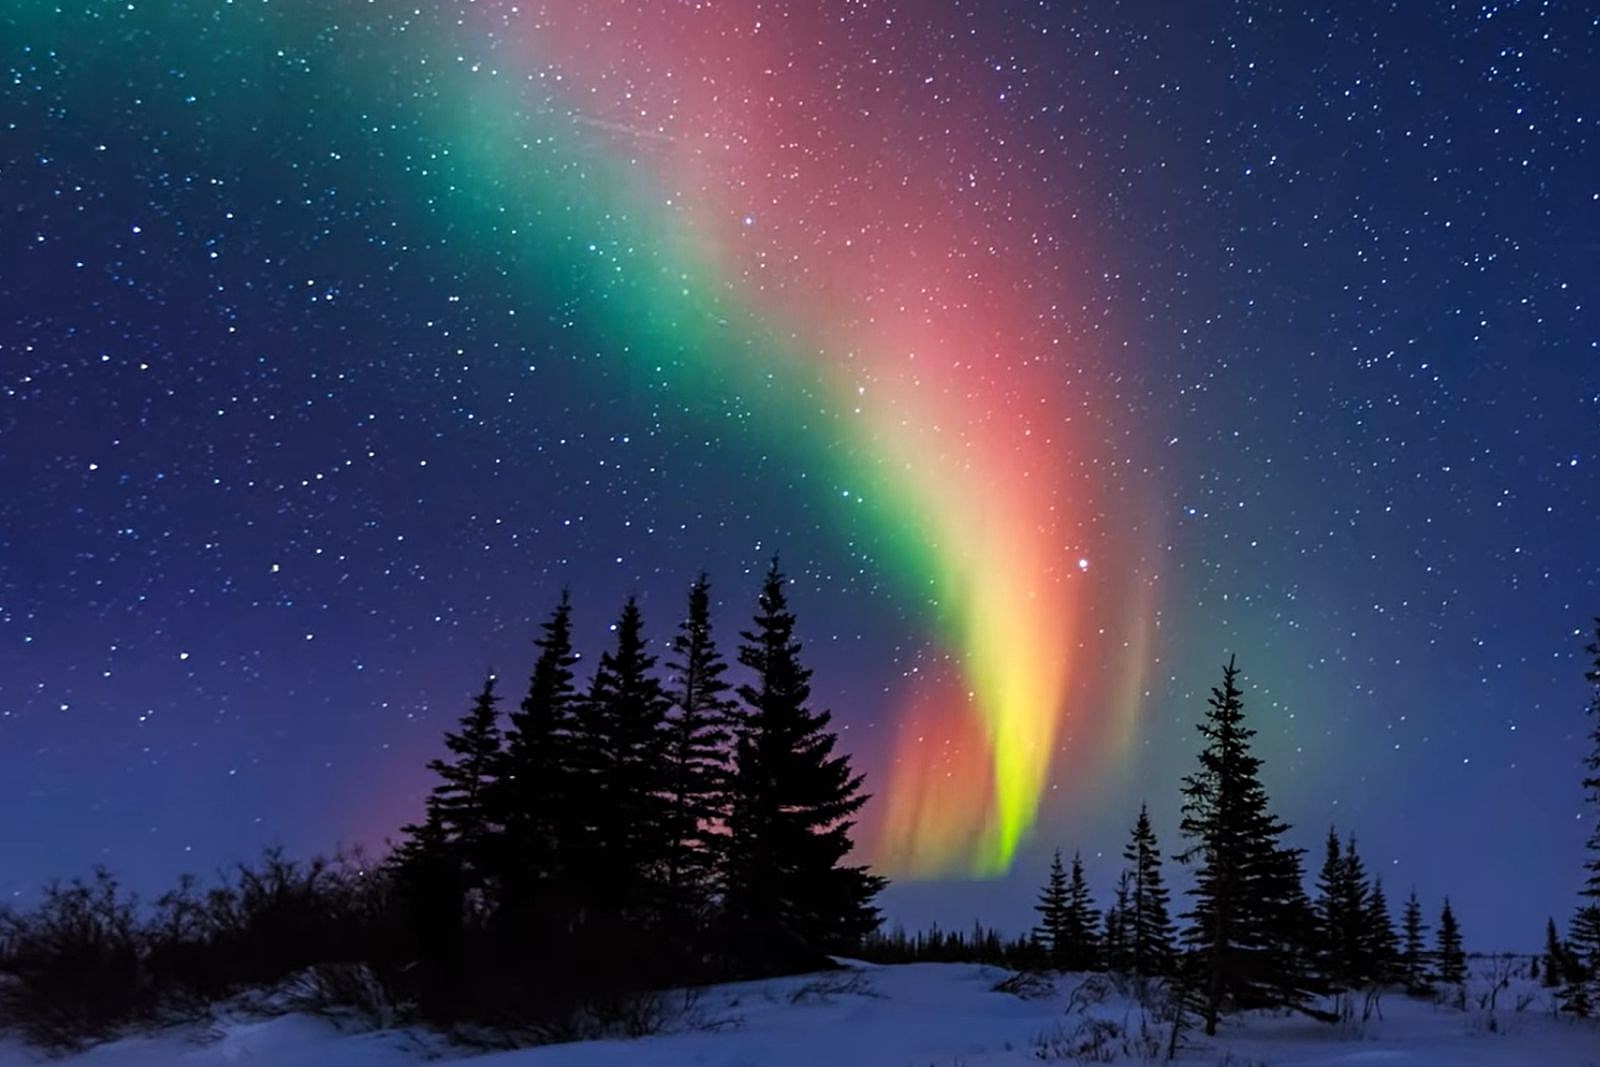 Amazing Pics of Northern Lights Captured Over Craters of the Moon (WATCH)